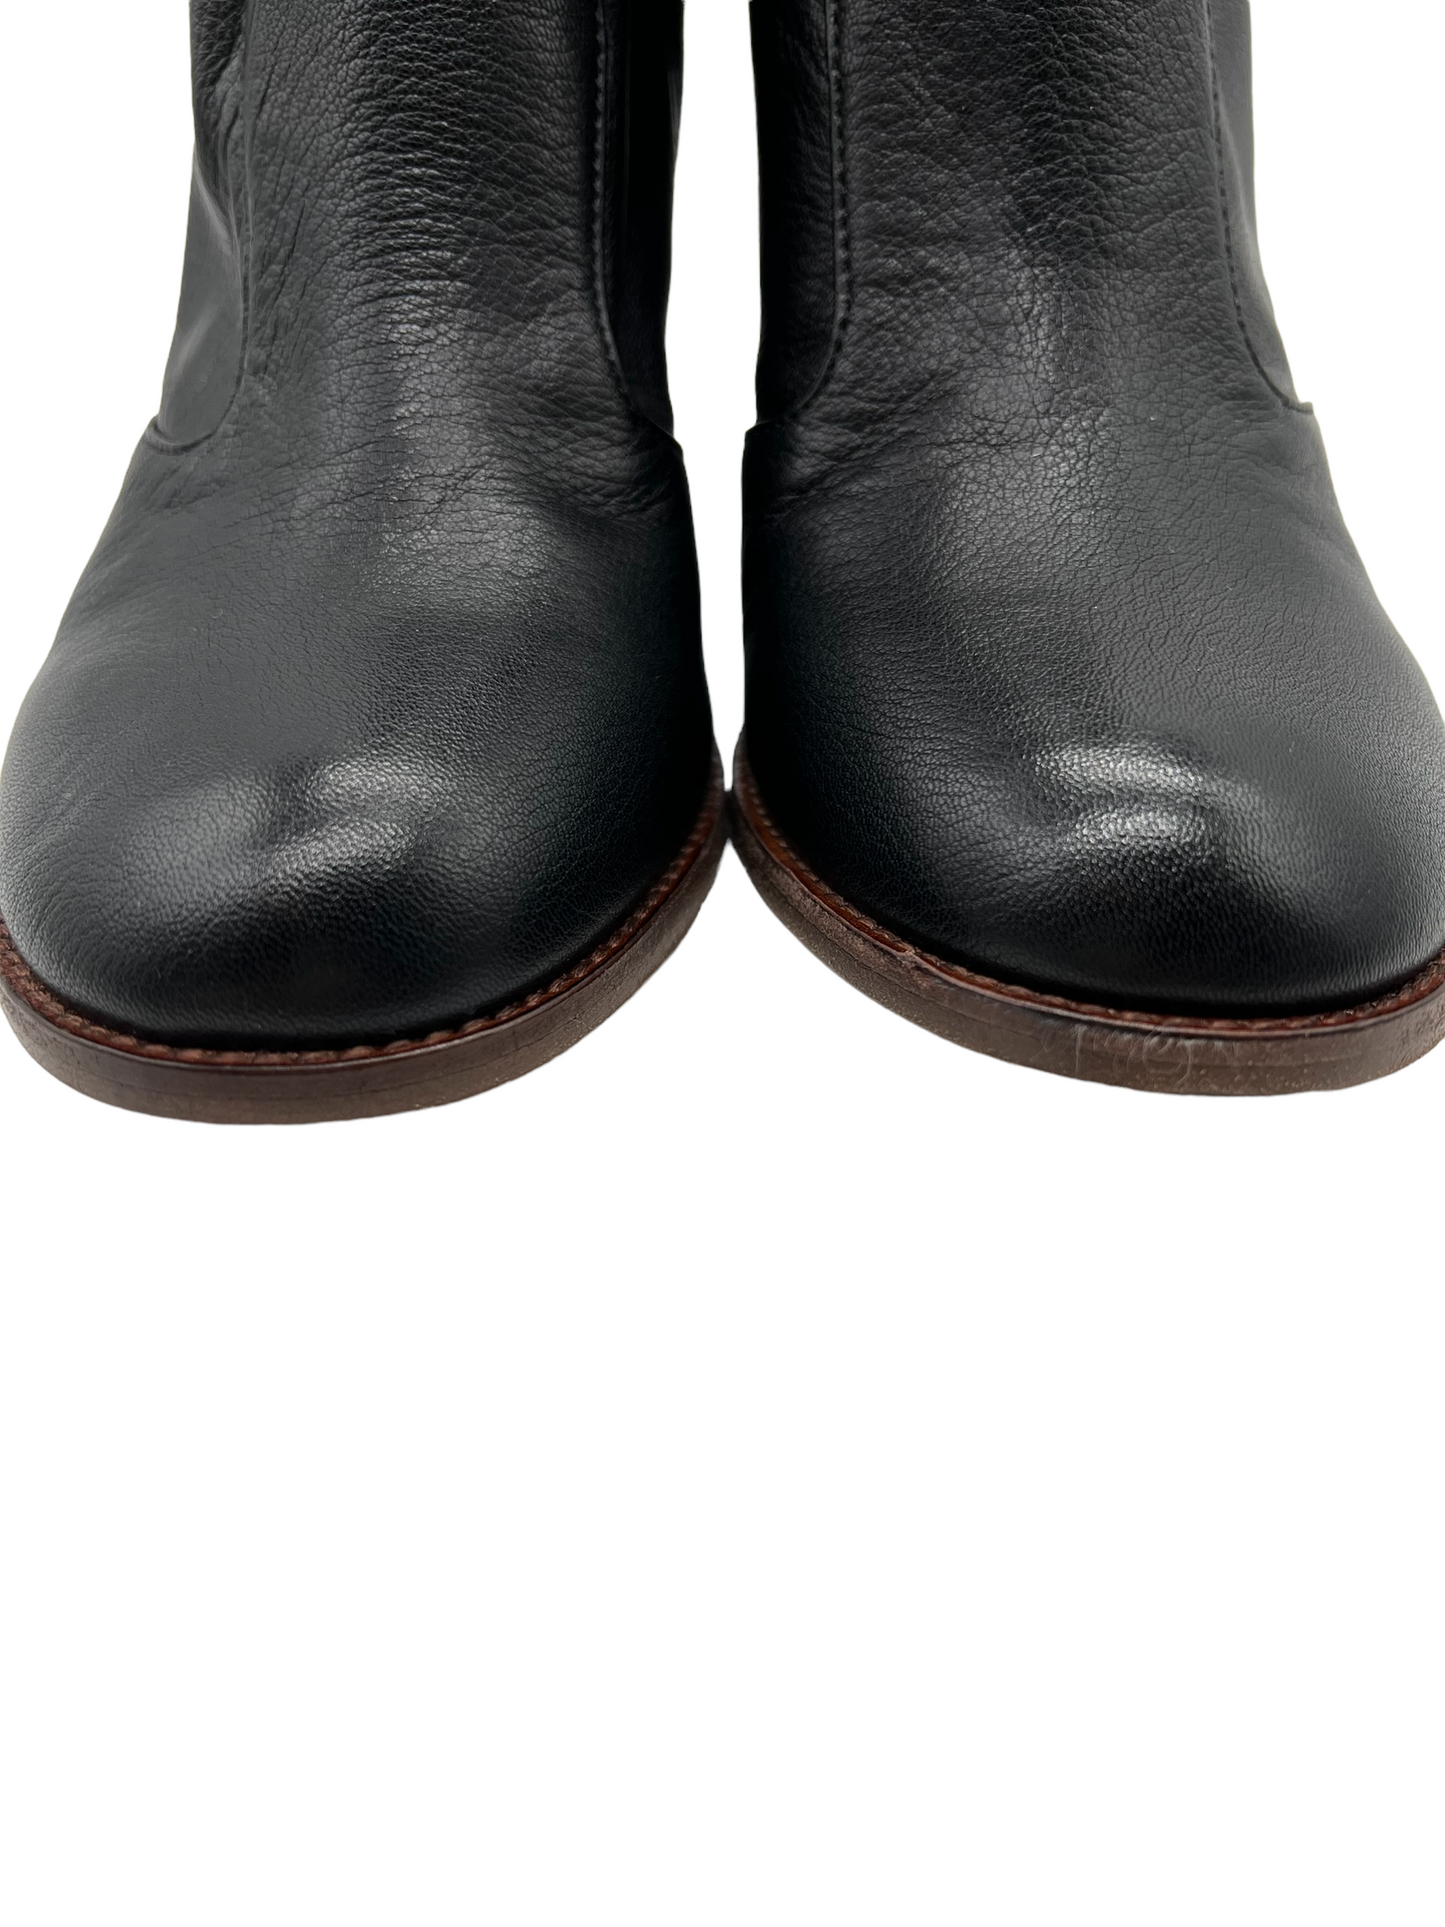 Marc Jacobs Black Leather Sofia Loves The Ankle Boots Size 40 Boots